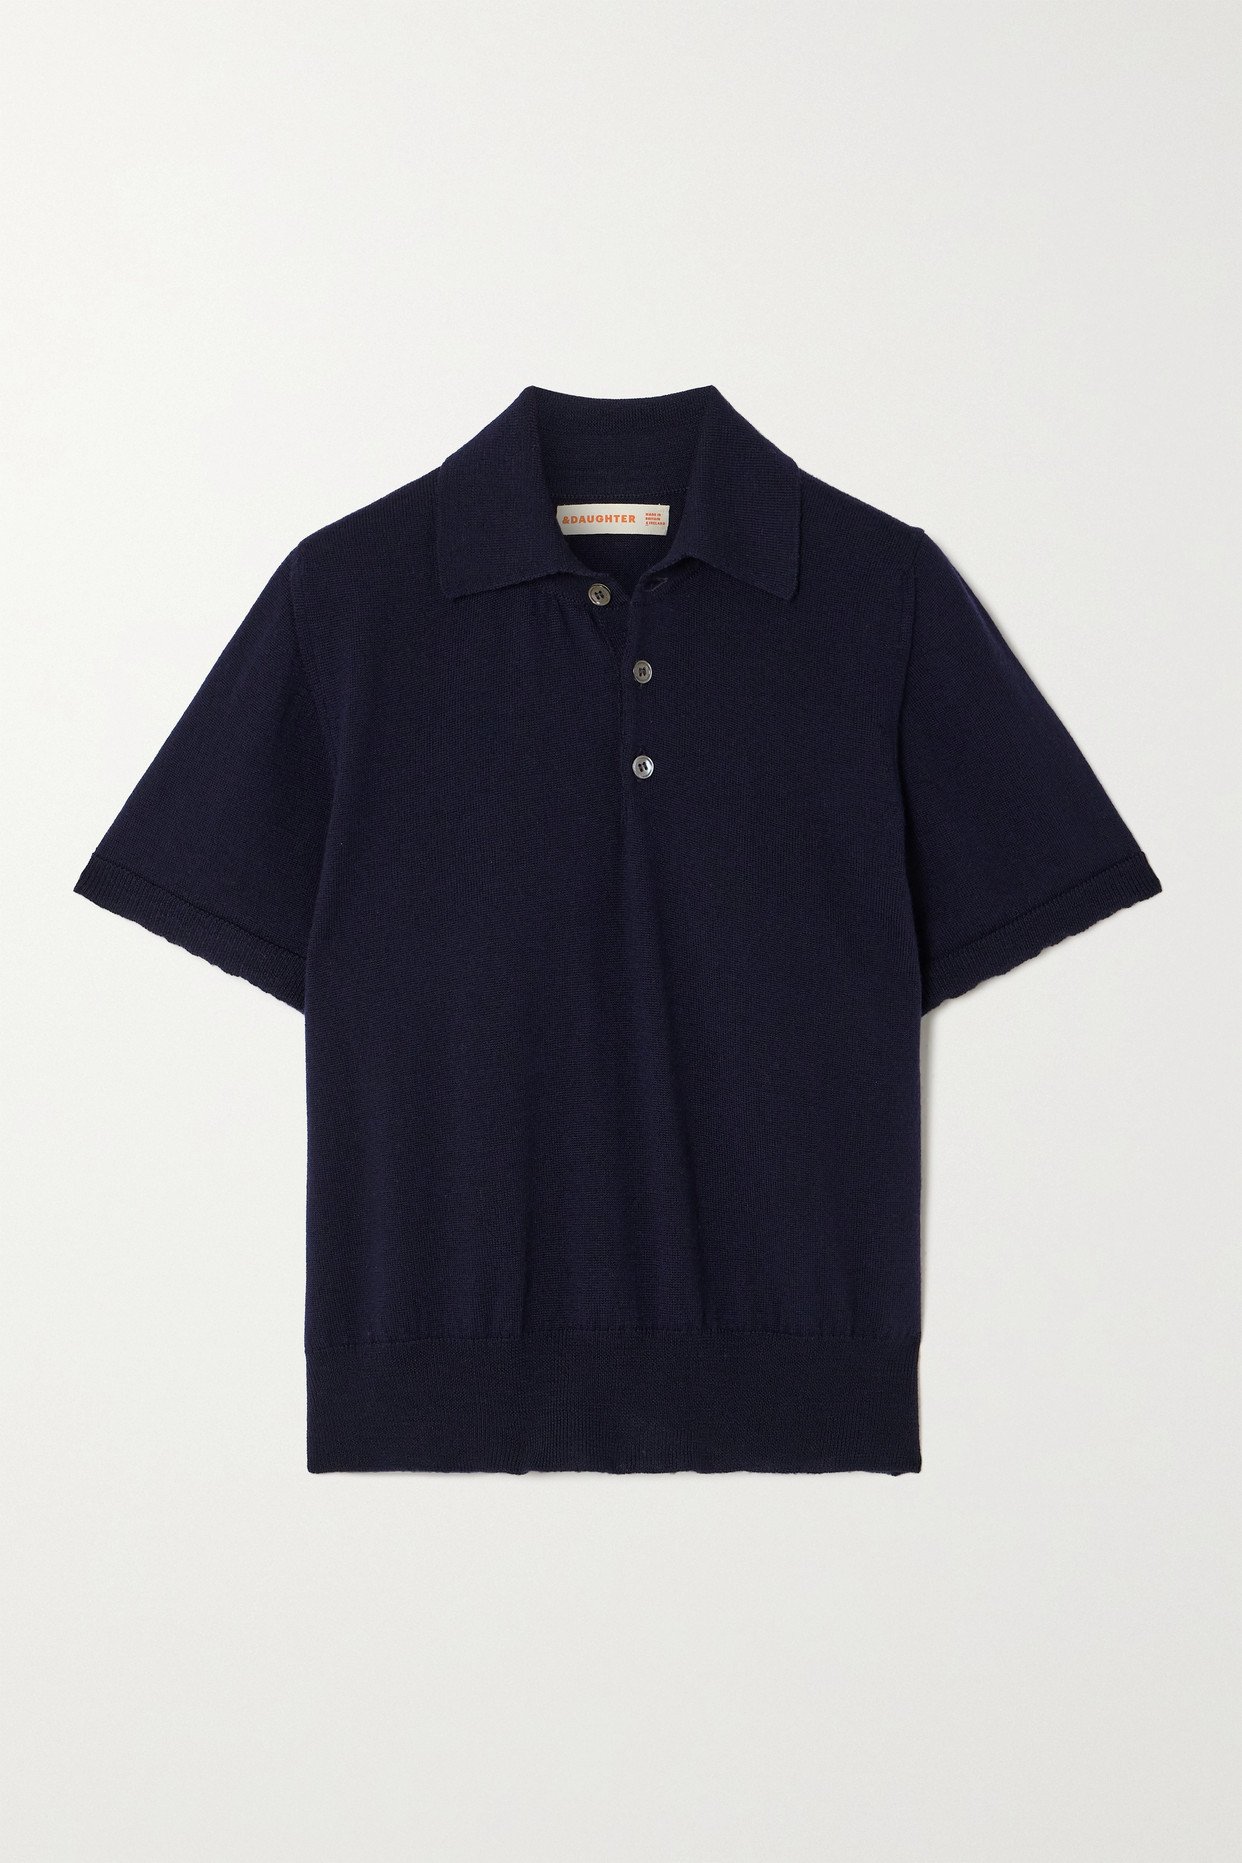 & Daughter Wool Polo Shirt in Blue | Endource